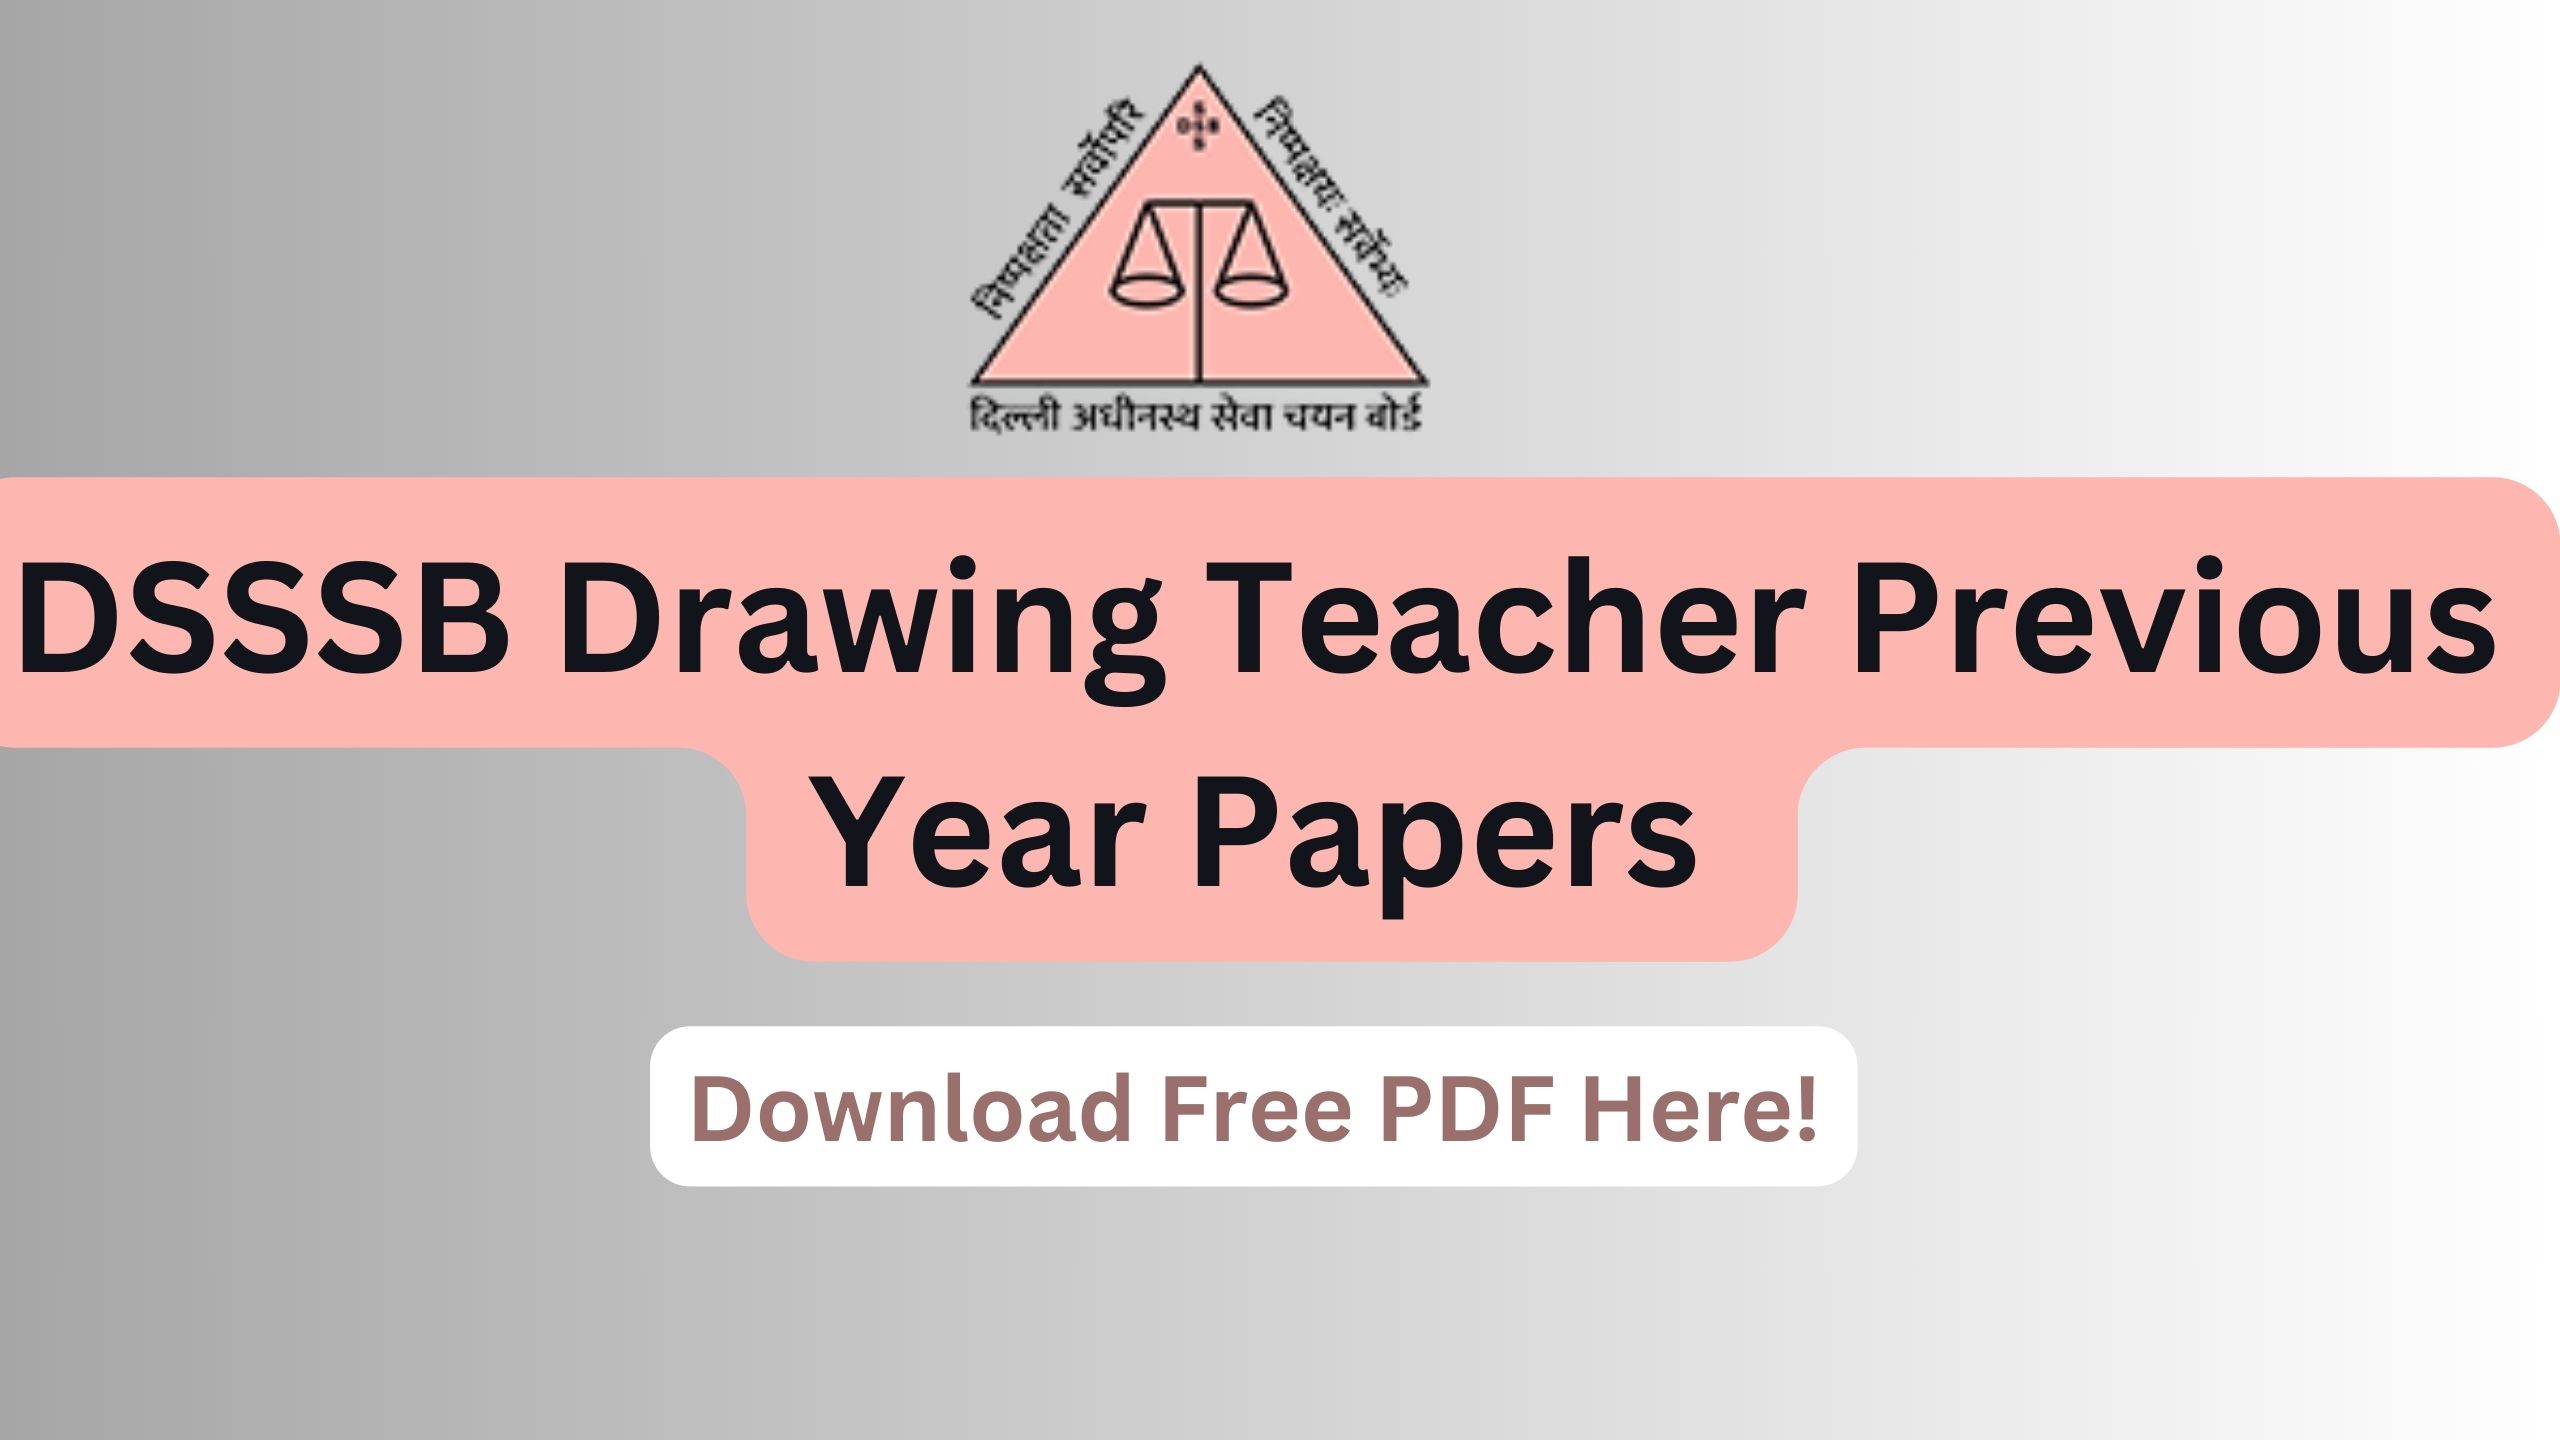 DSSSB Drawing Teacher Previous Year Papers, Download Free PDF Here!